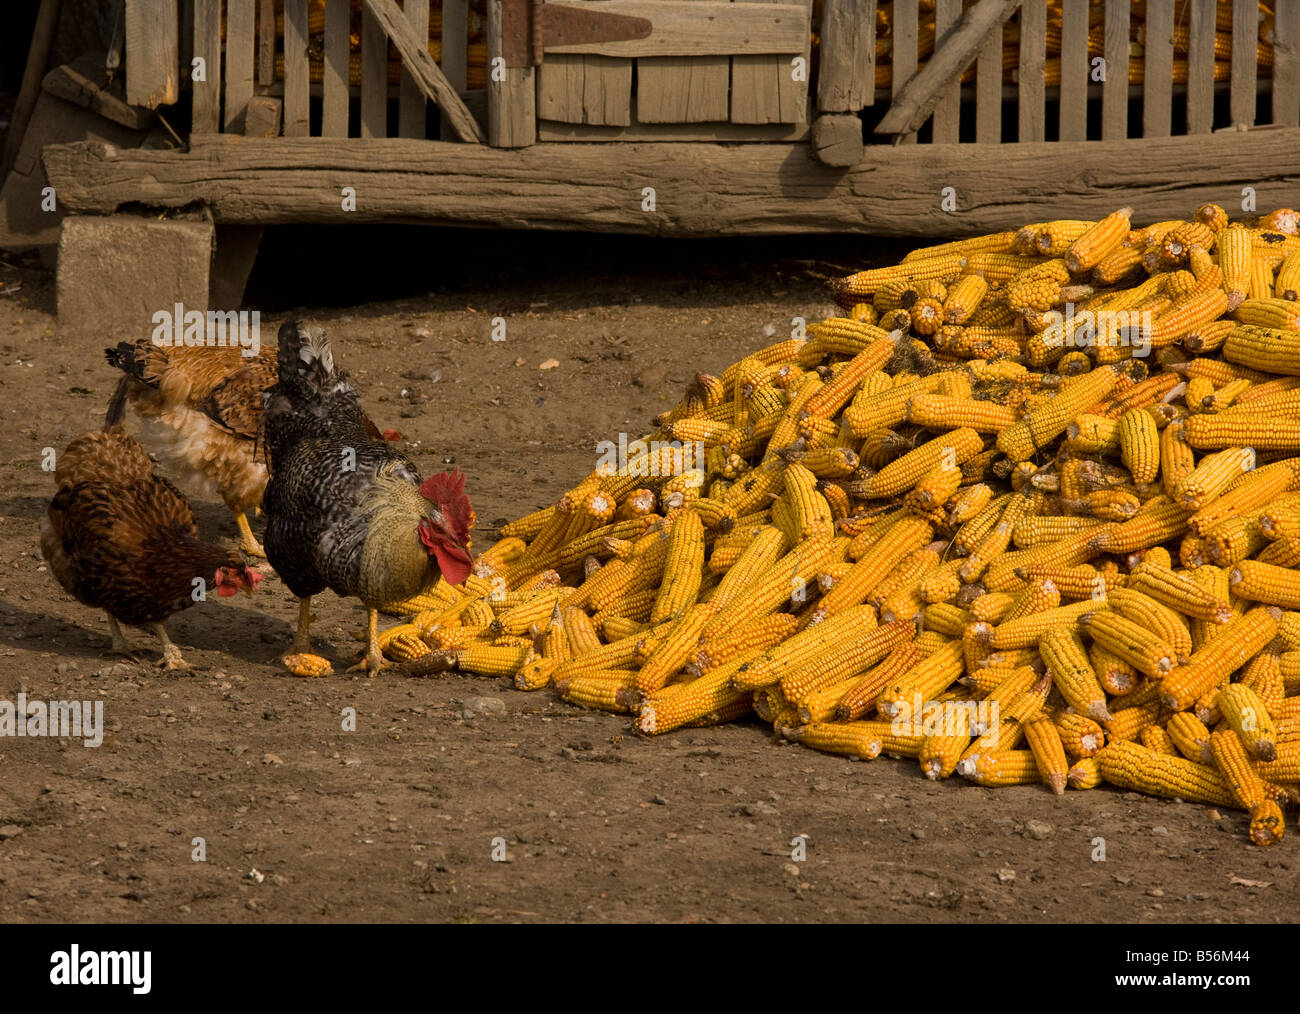 Chickens in farmyard eating from pile of maize or corn autumn Romania Stock Photo